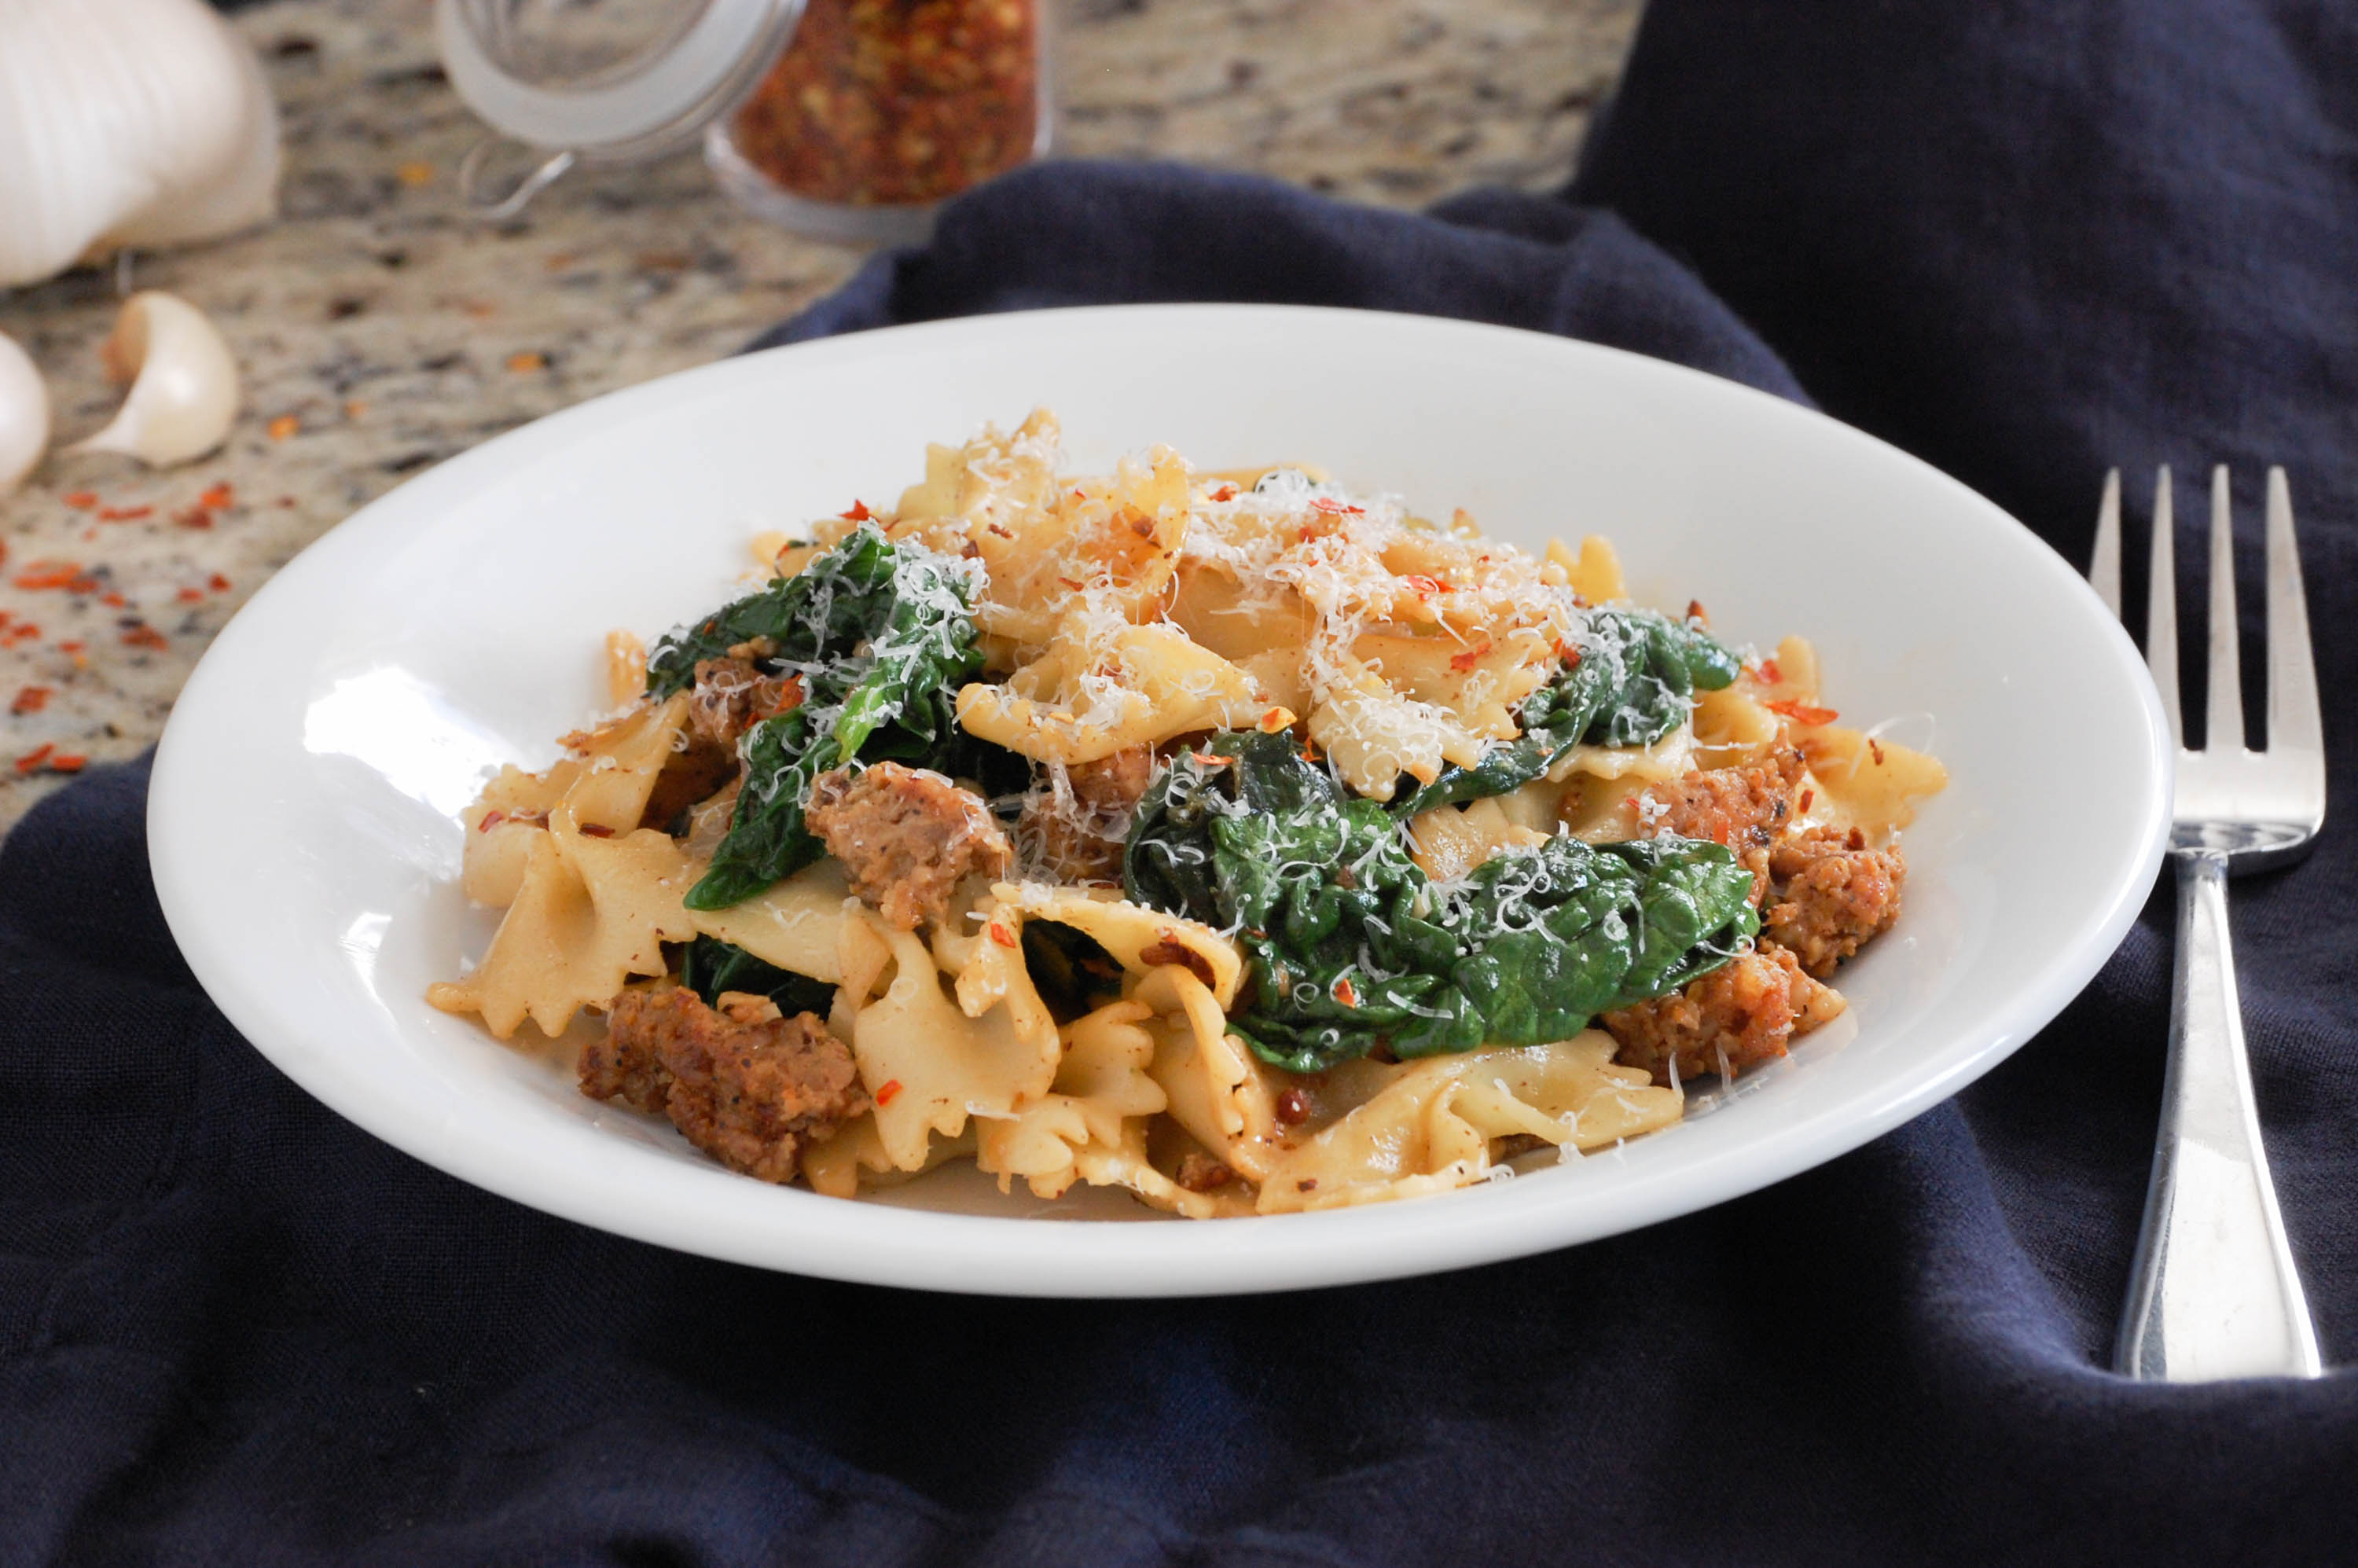 Spicy Pasta with Sausage and Spinach via The District Table